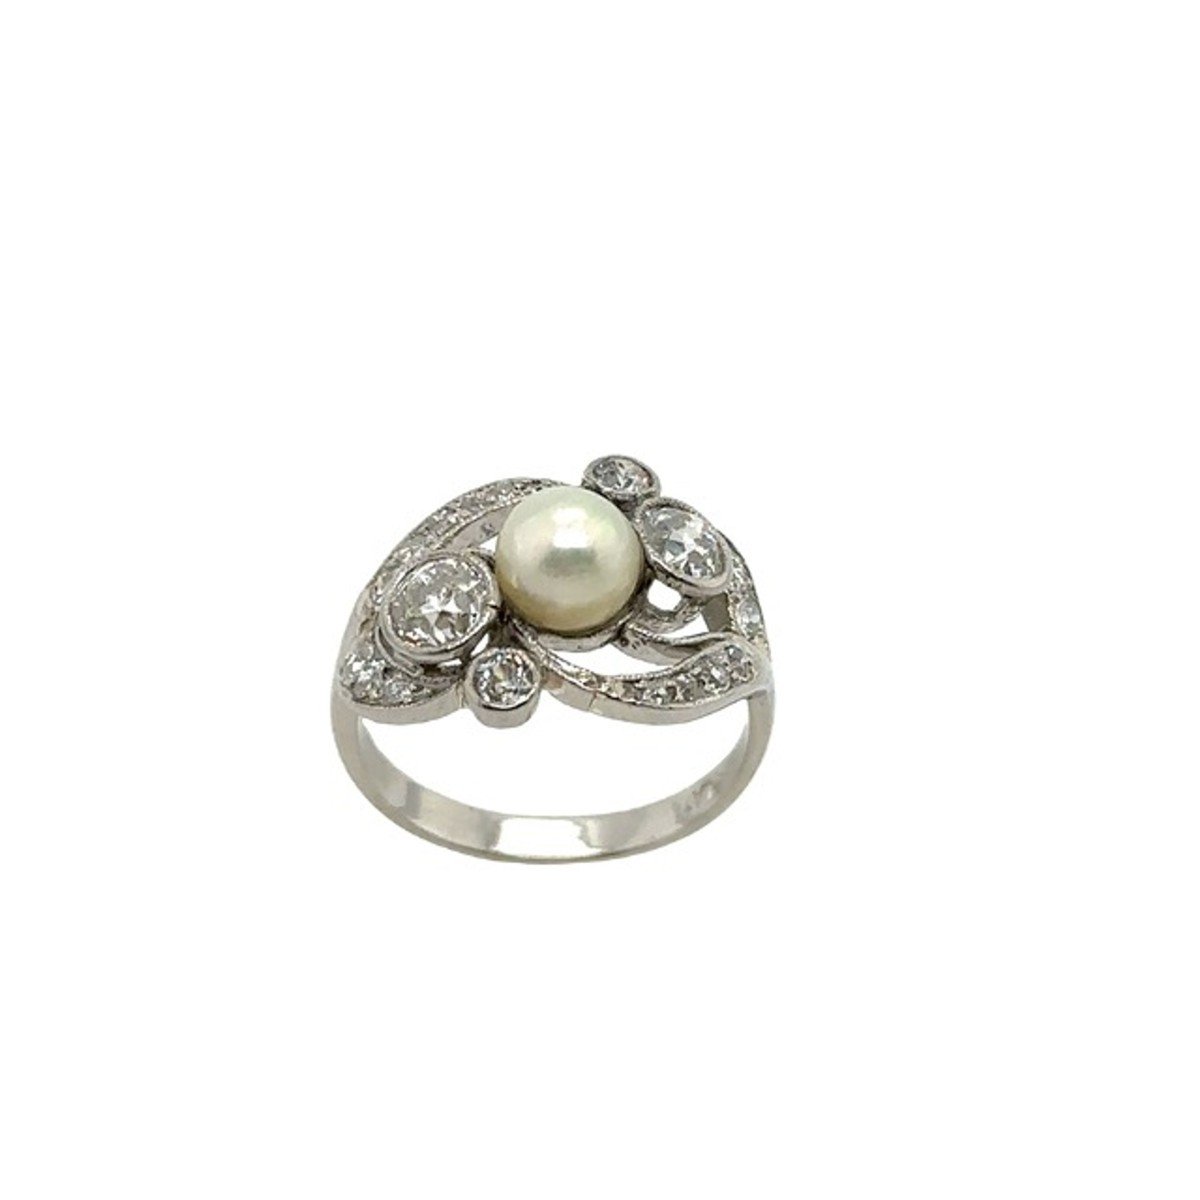 Vintage Diamond And Pearl Ring Set In Platinum, 0.90ct Of Diamonds